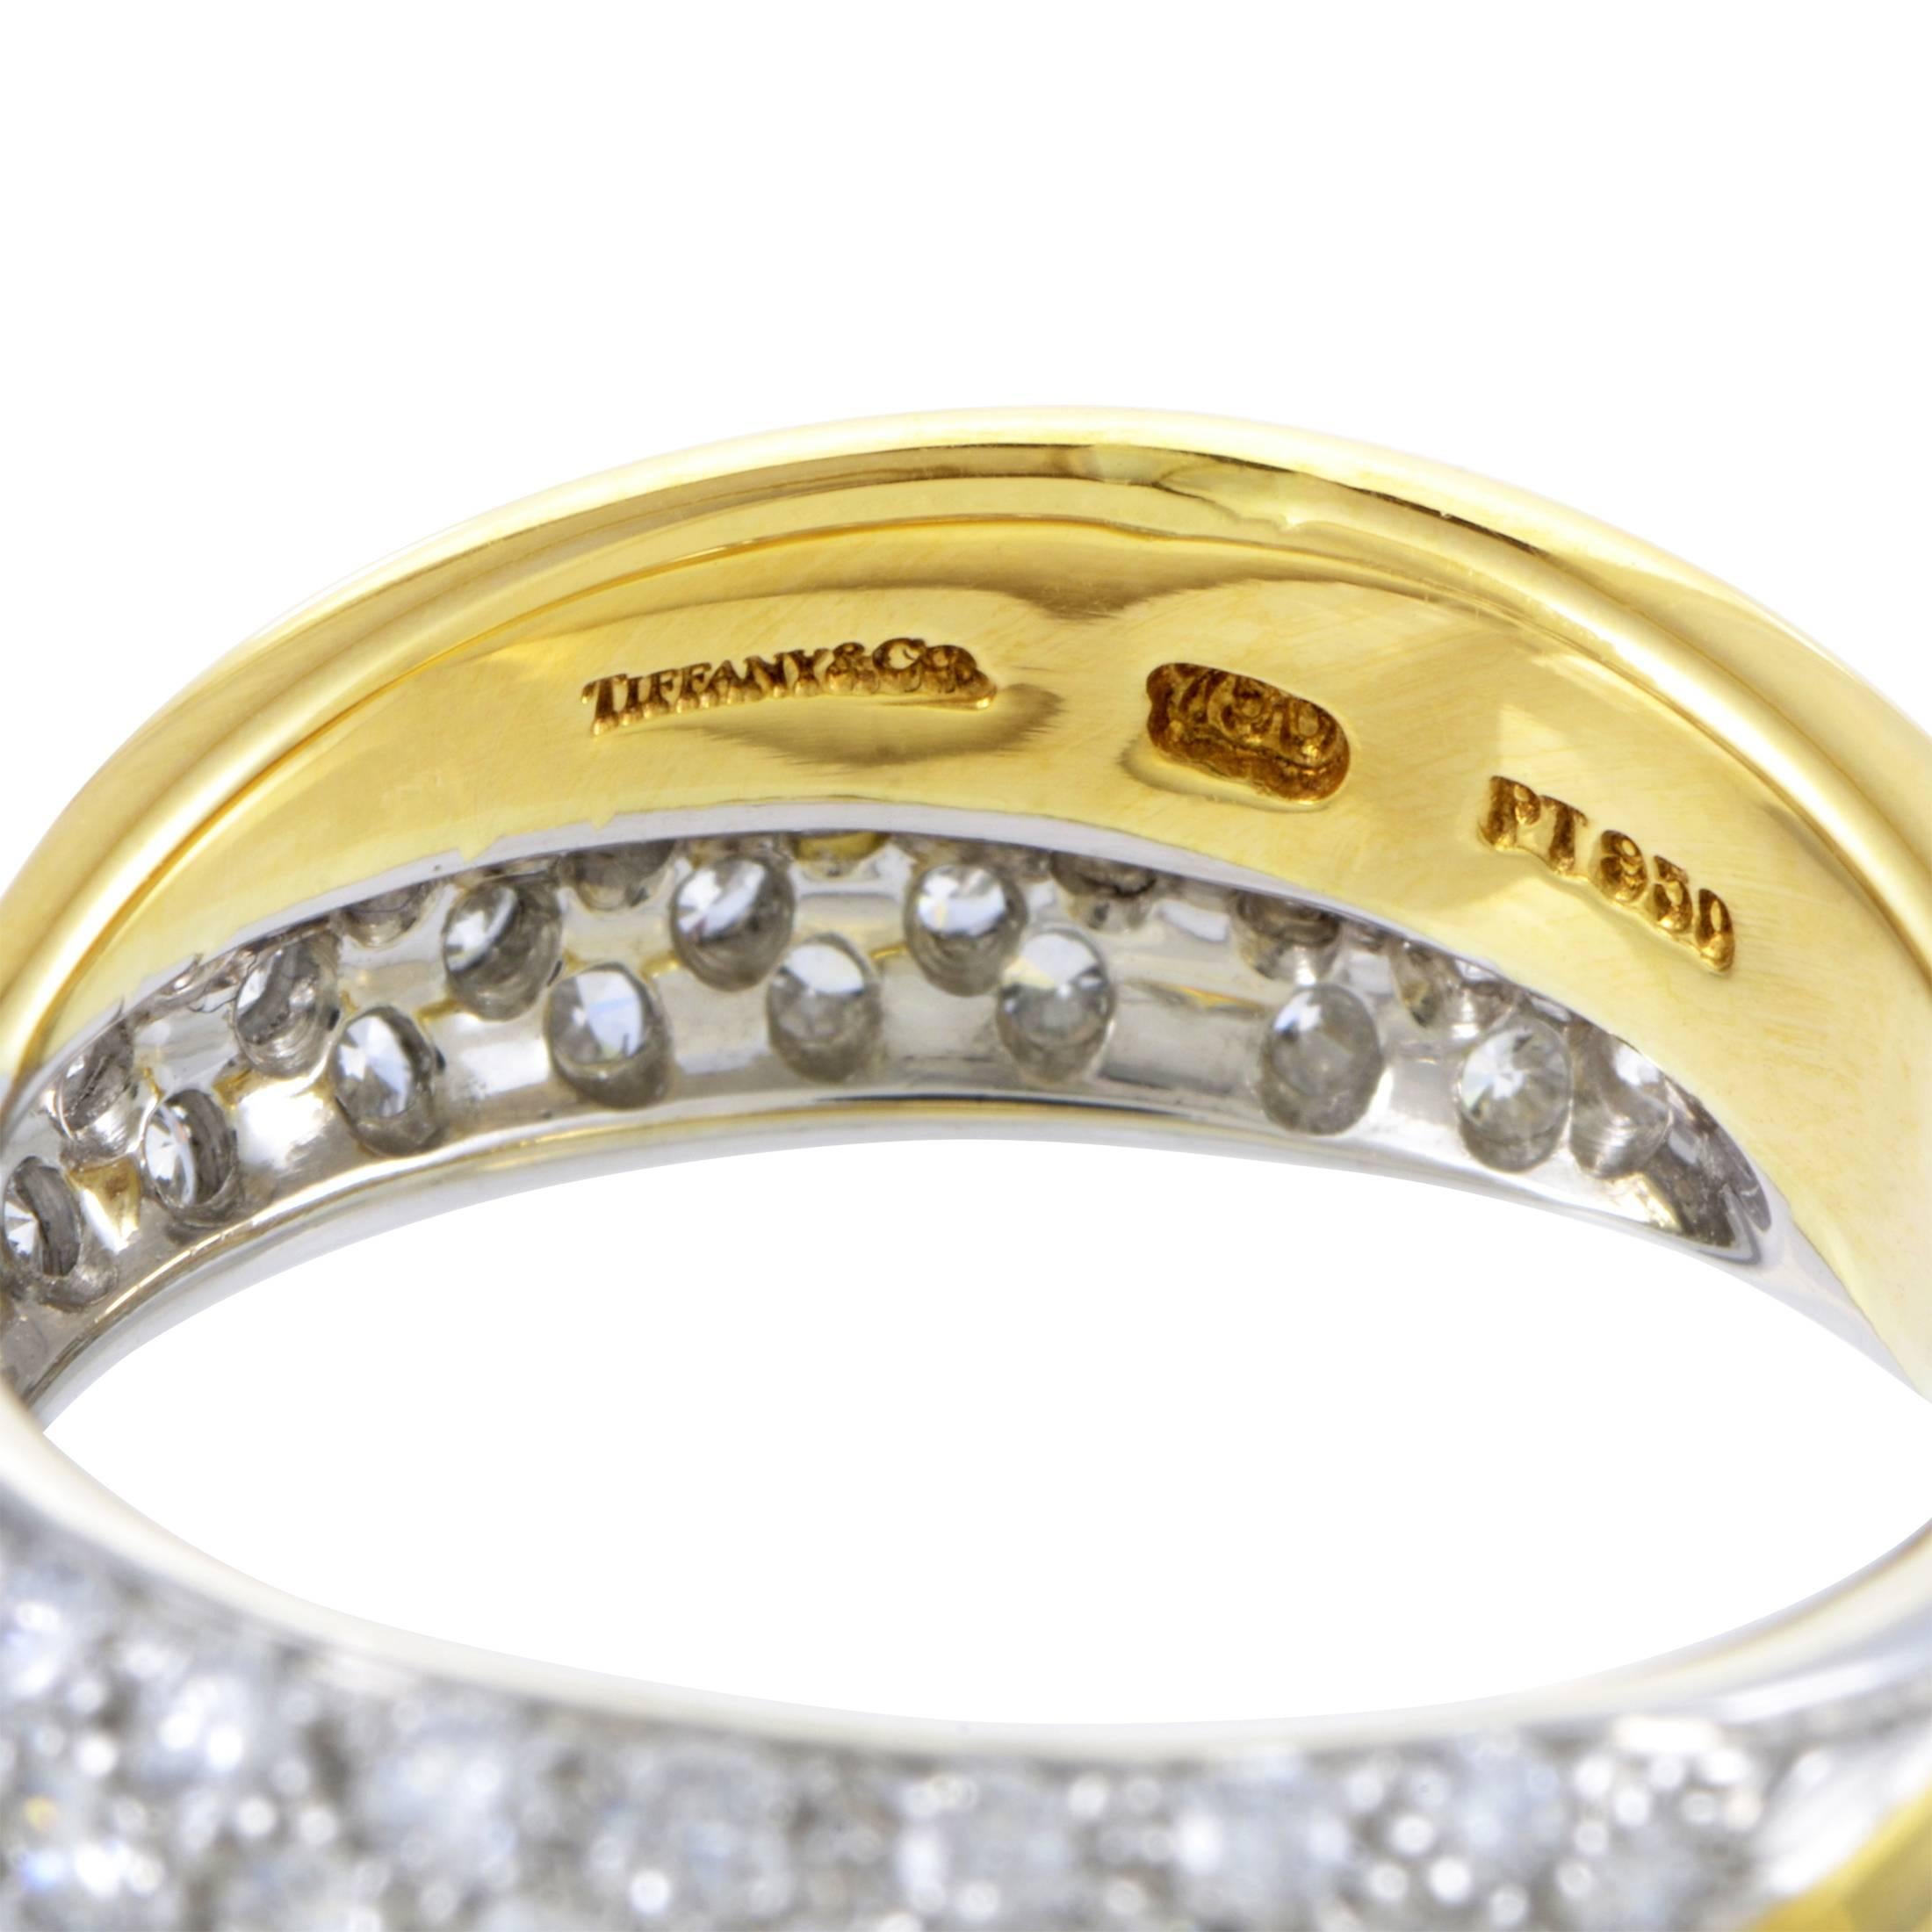 Tiffany & Co. Yellow Gold and Platinum Diamond Pave Band Ring 1